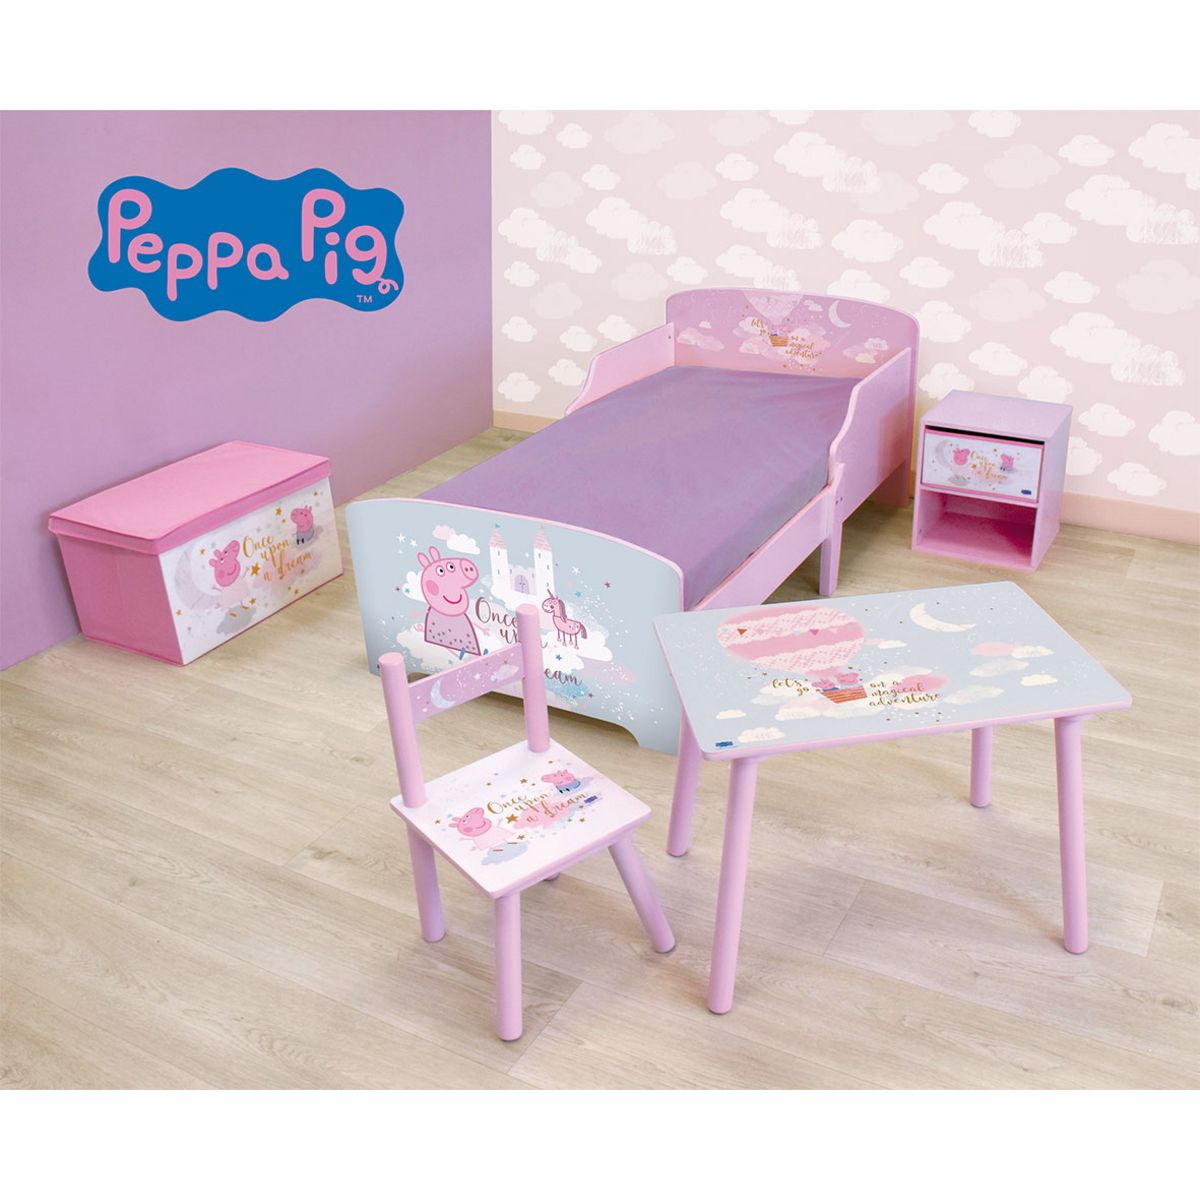 Fun House FUN HOUSE PEPPA PIG Pack chambre complet pour enfant